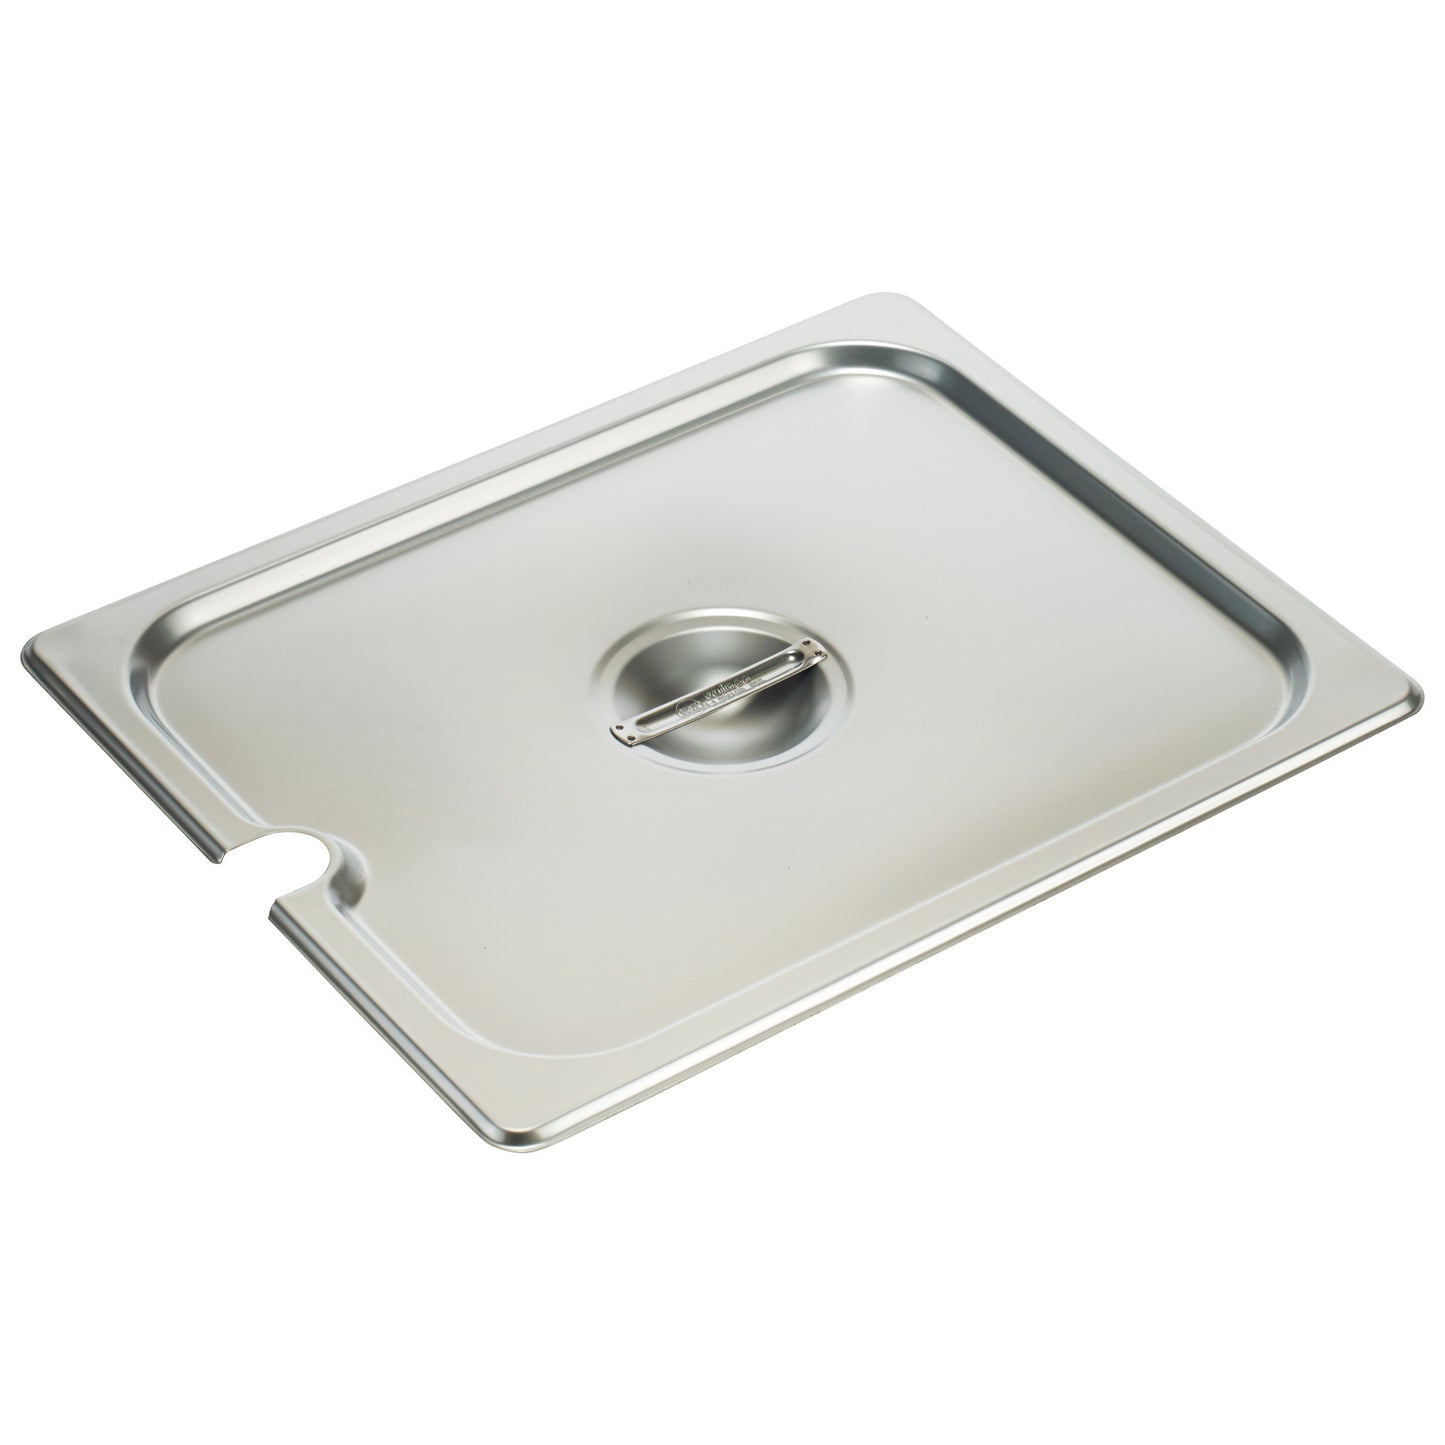 SPCH - 18/8 Stainless Steel Steam Pan Cover, Slotted - Half